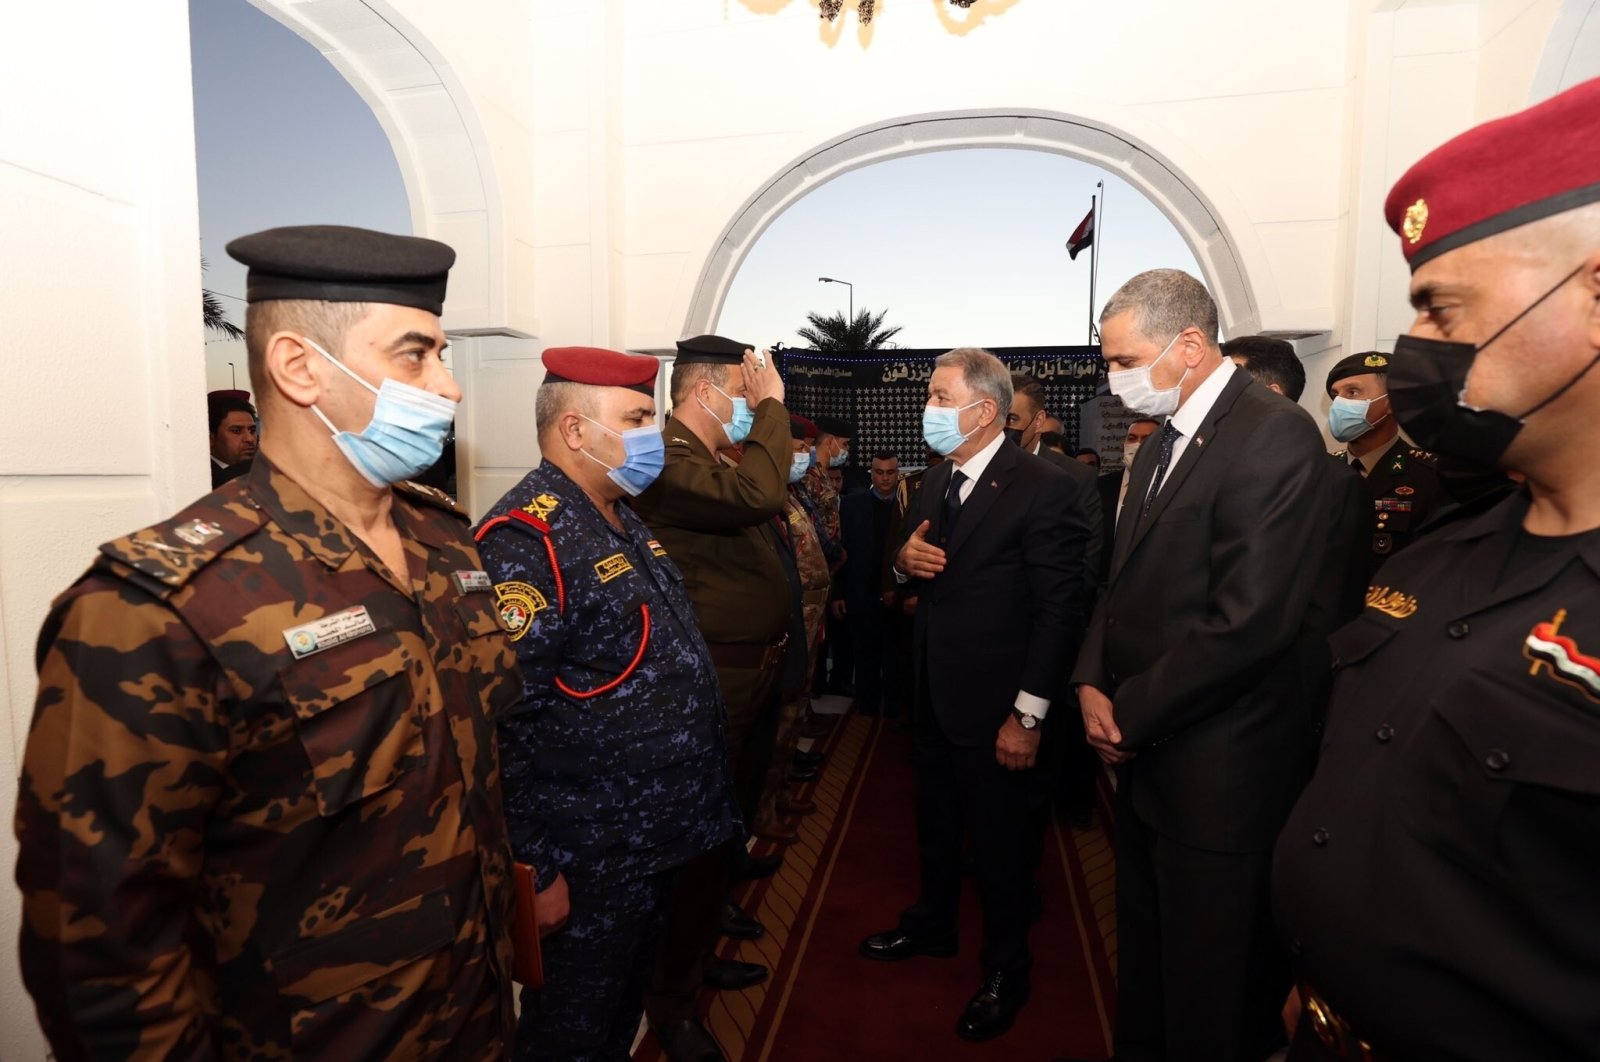 Defense Minister Hulusi Akar, alongside a Turkish delegation, meets with Iraqi Interior Minister Othman al-Ghanmi and Iraqi soldiers during a visit to Baghdad, Iraq, Jan. 18, 2021. (IHA Photo)